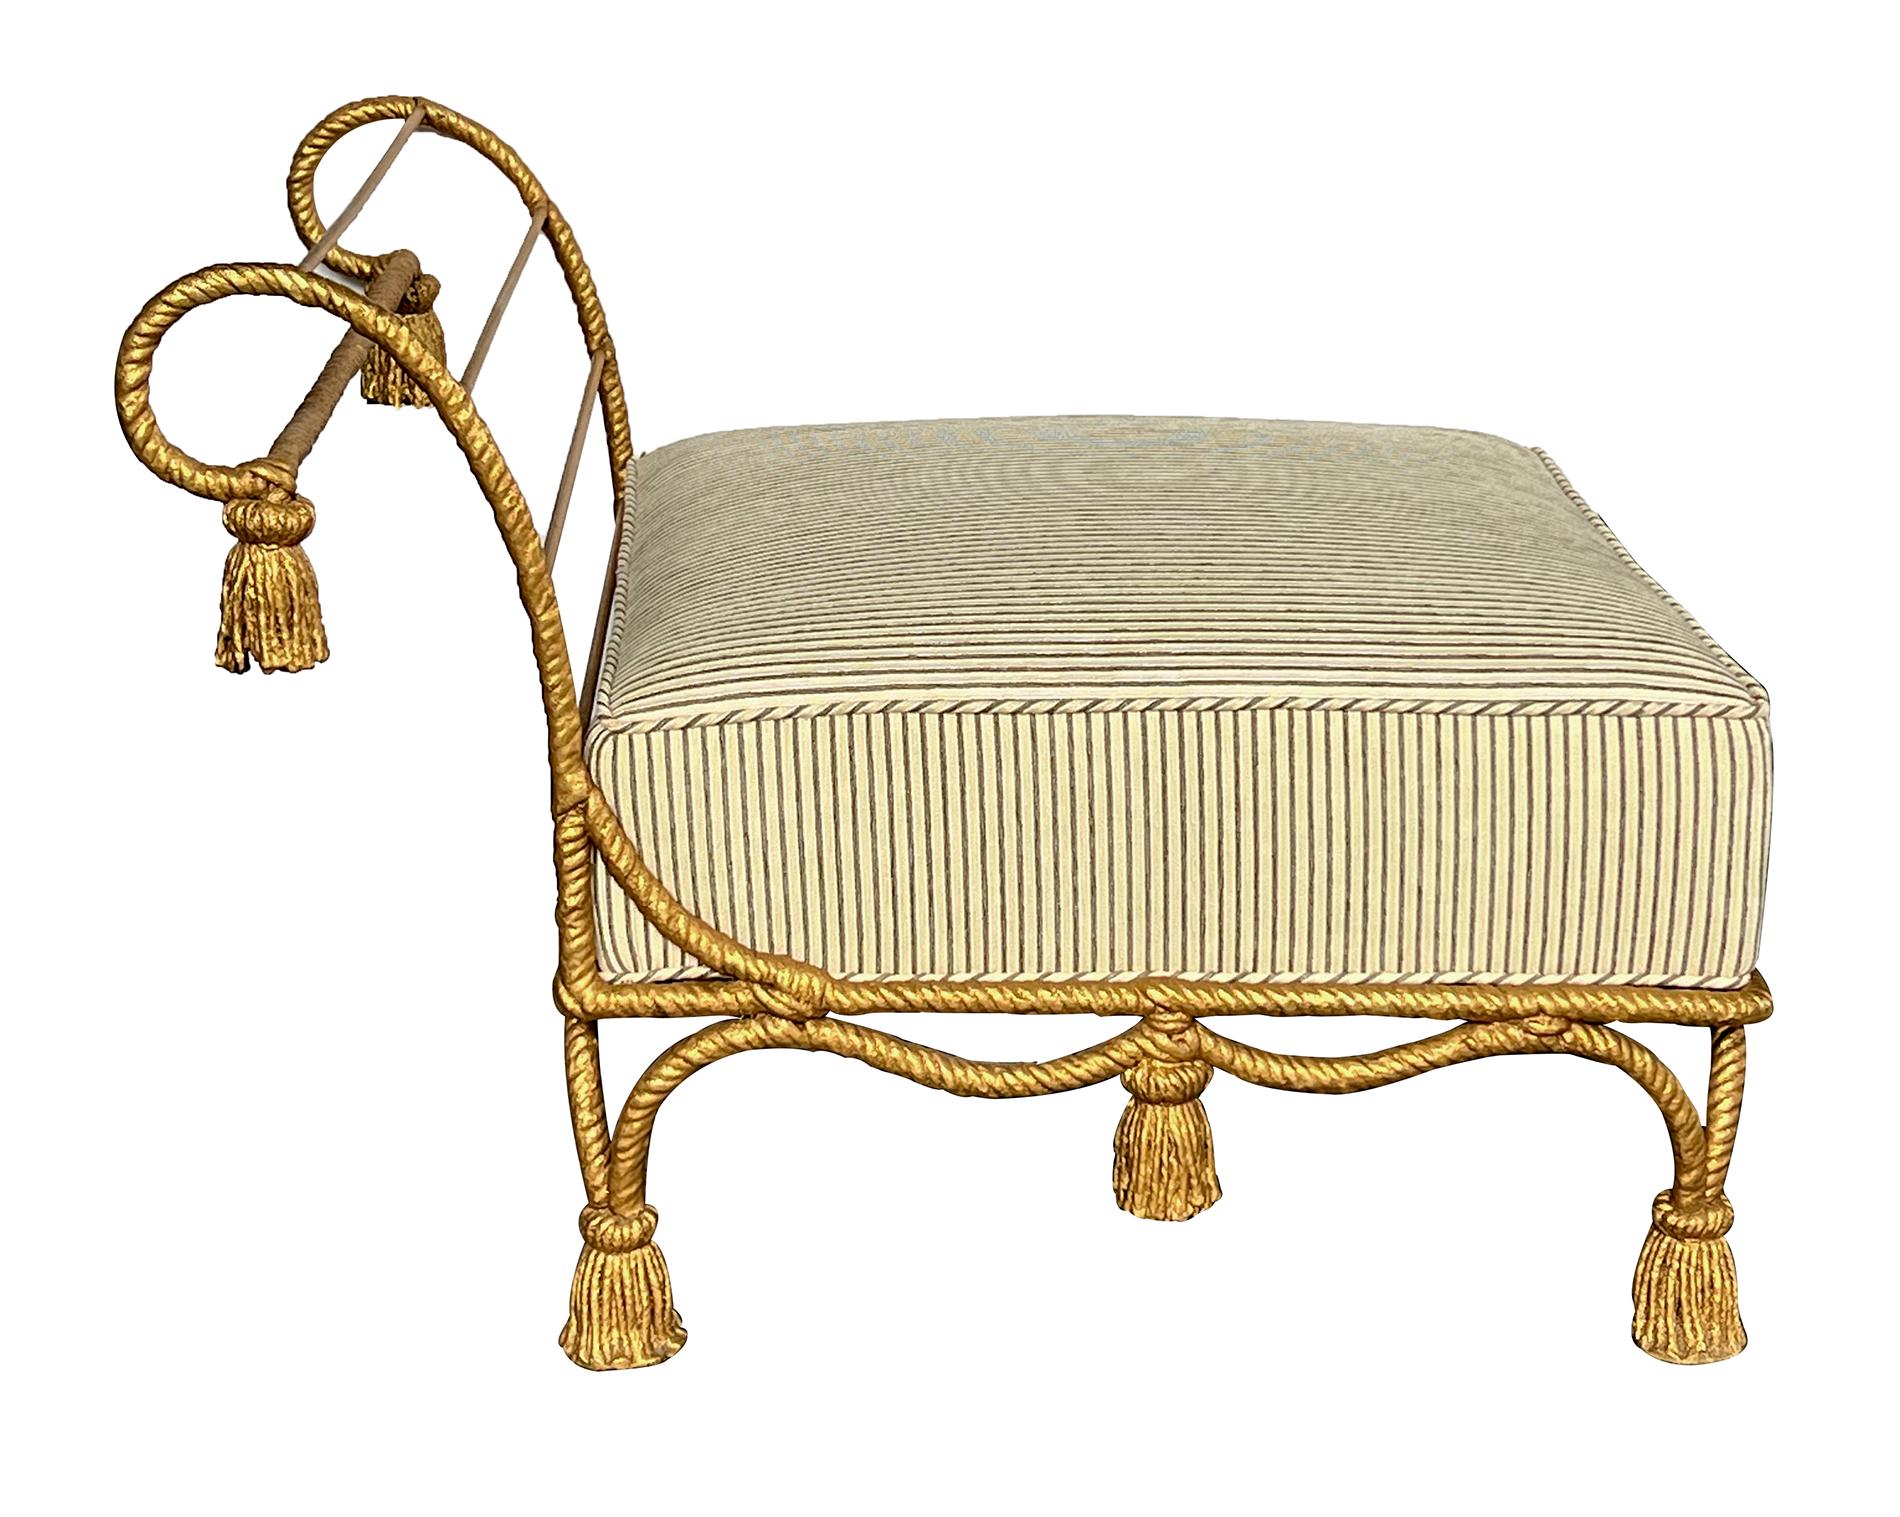 the square upholstered seat with a low out-scrolled openwork backrest; all above an undulating apron raised on tassels